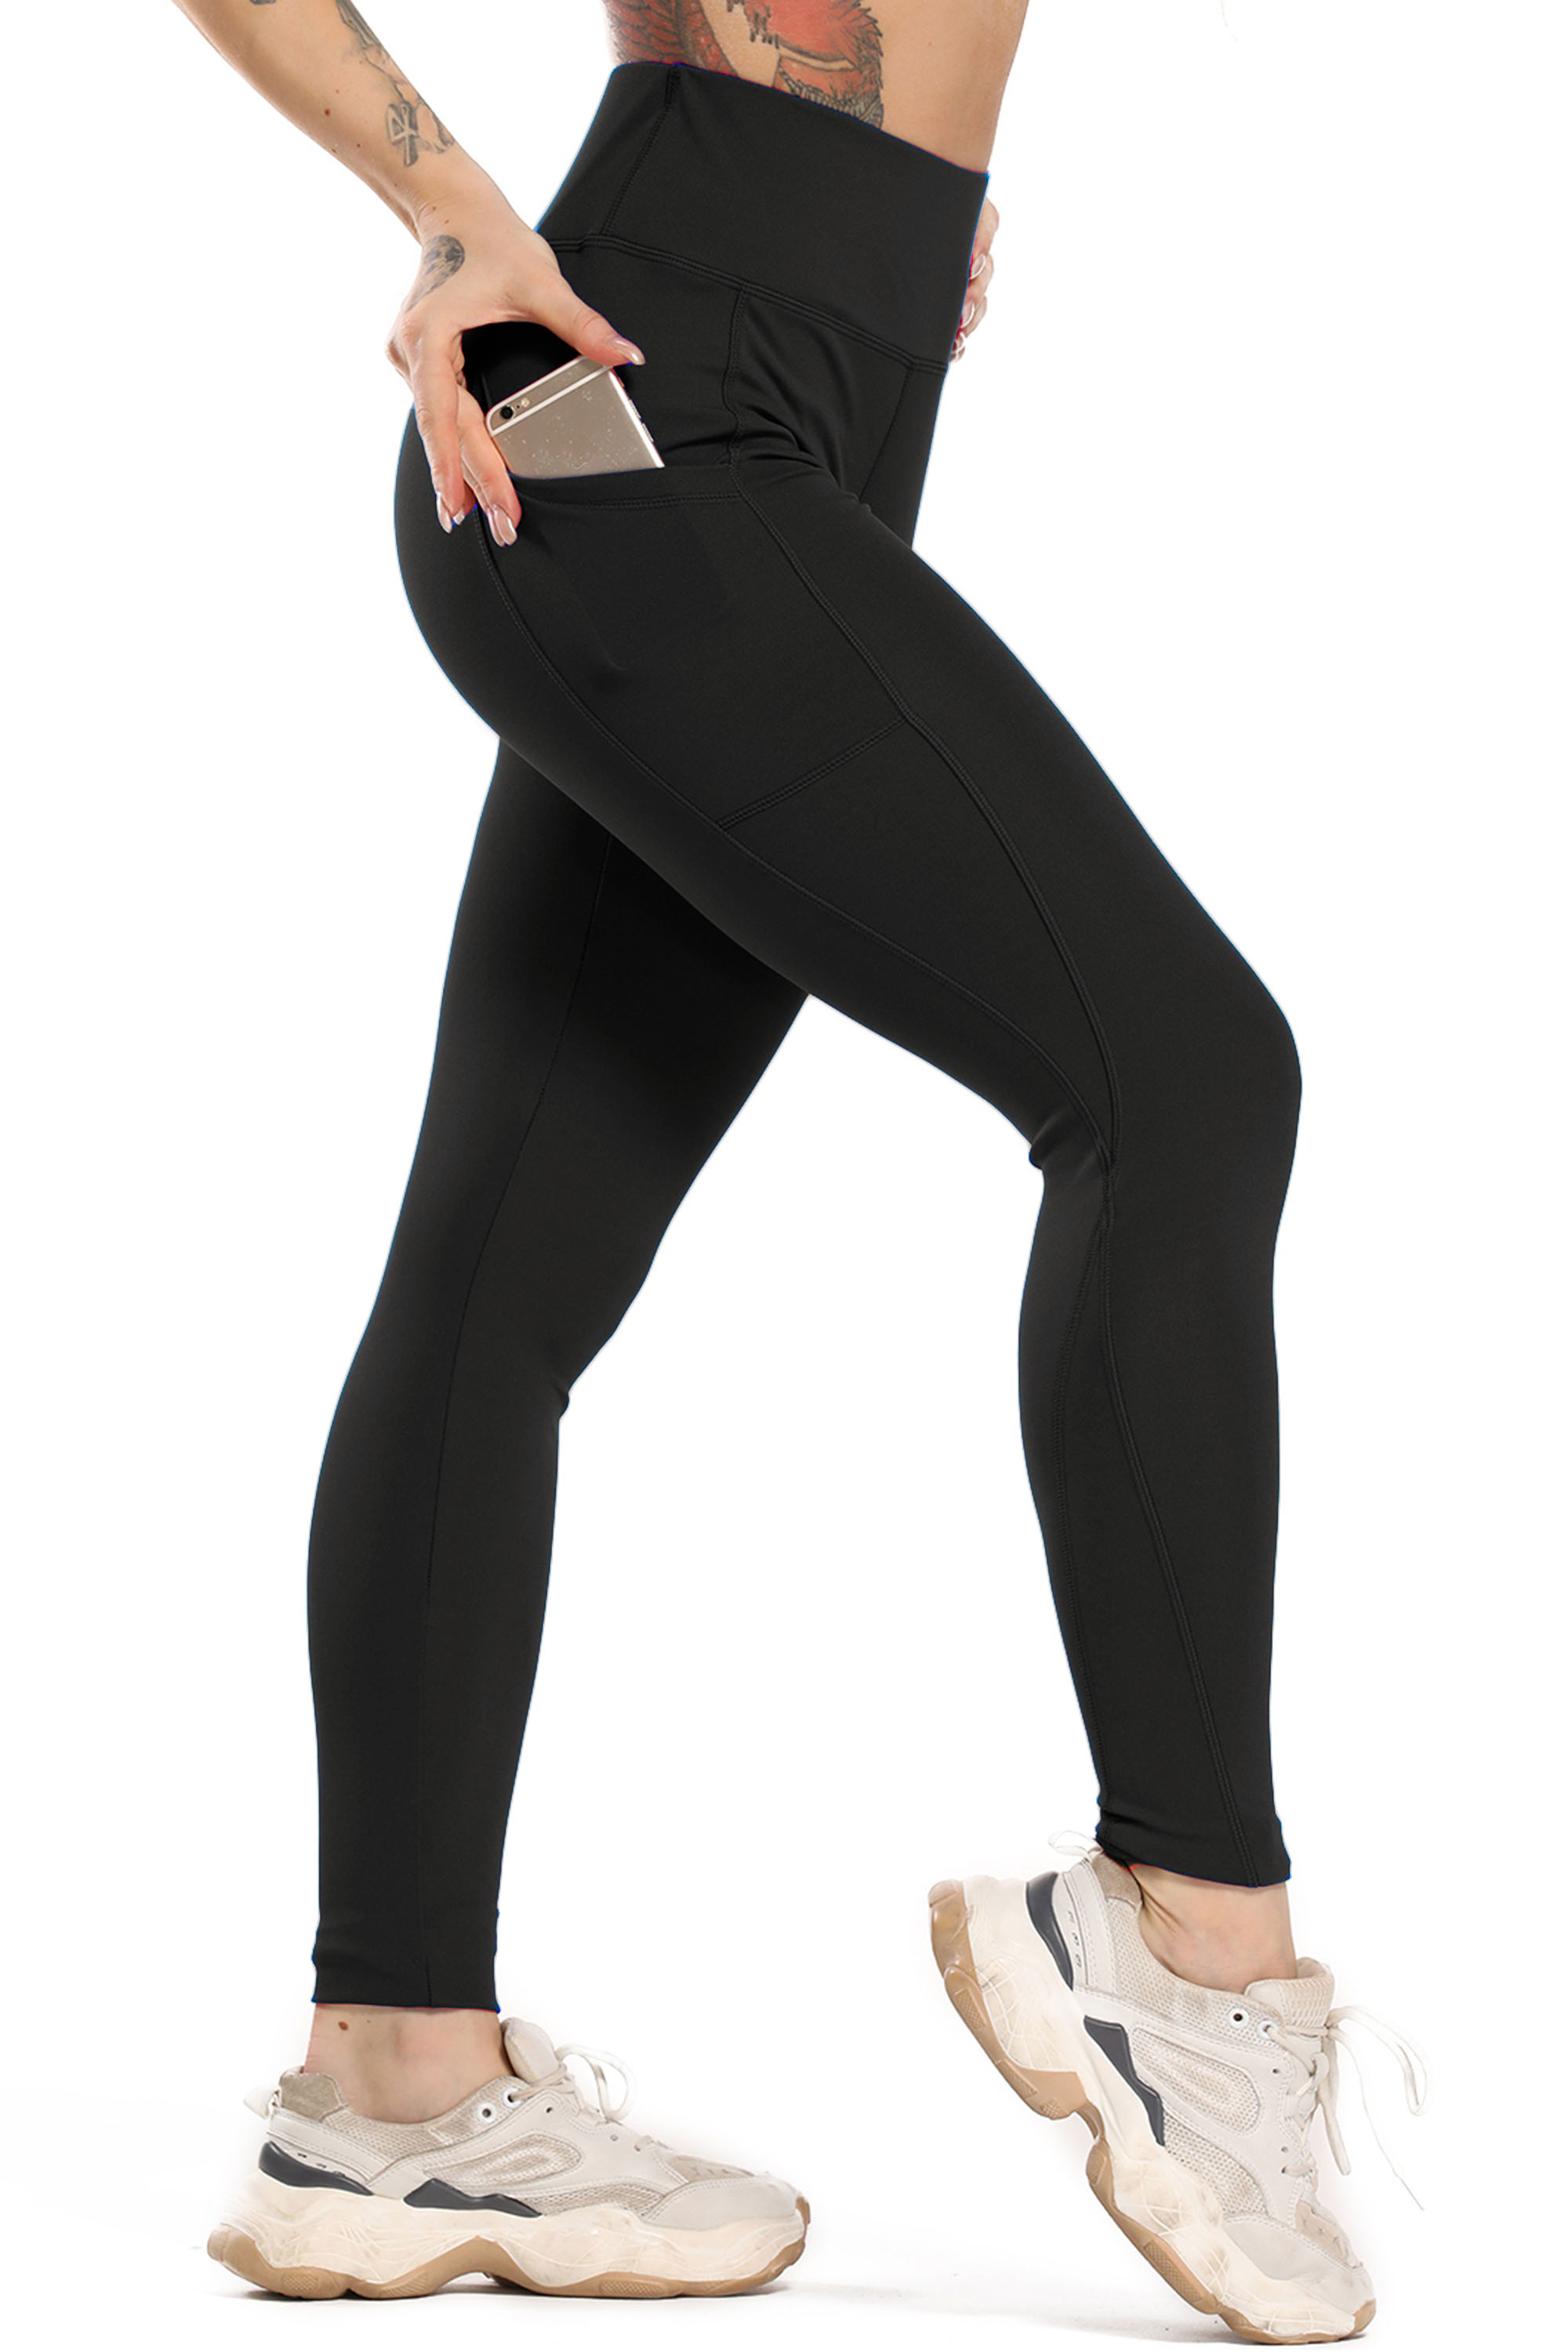 ALONG FIT Yoga Pants for Women Leggings with Side Pockets Workout Running Tights